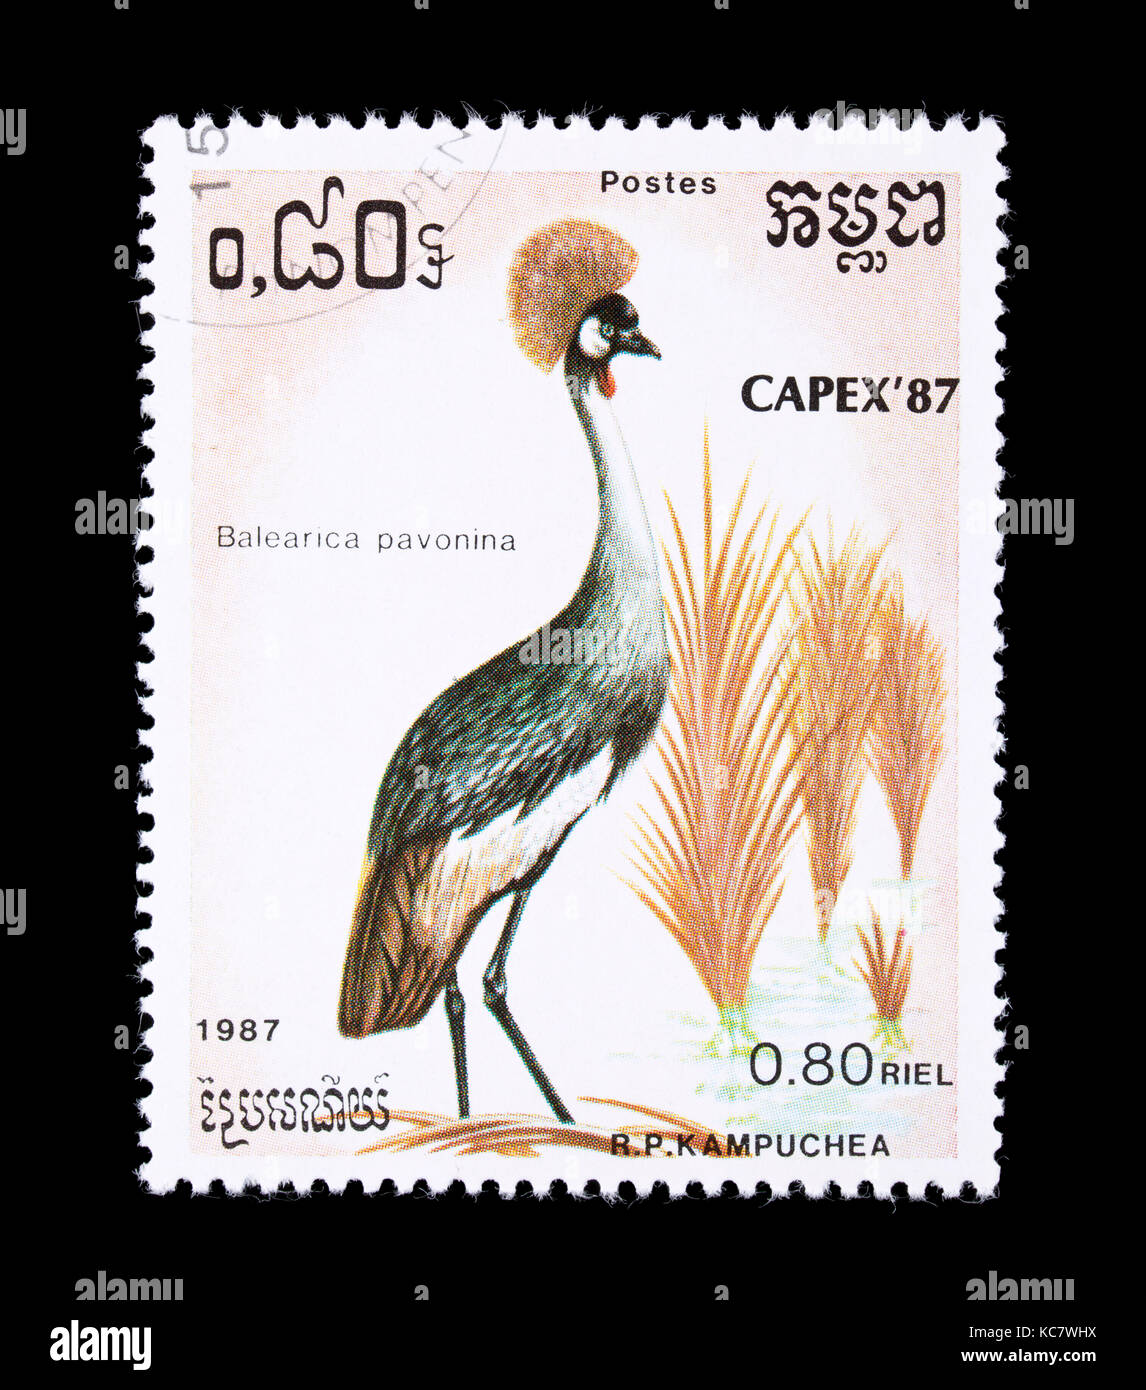 Postage stamp from Cambodia (Kampuchea) depicting a black crowned crane (Balearica pavonina) Stock Photo